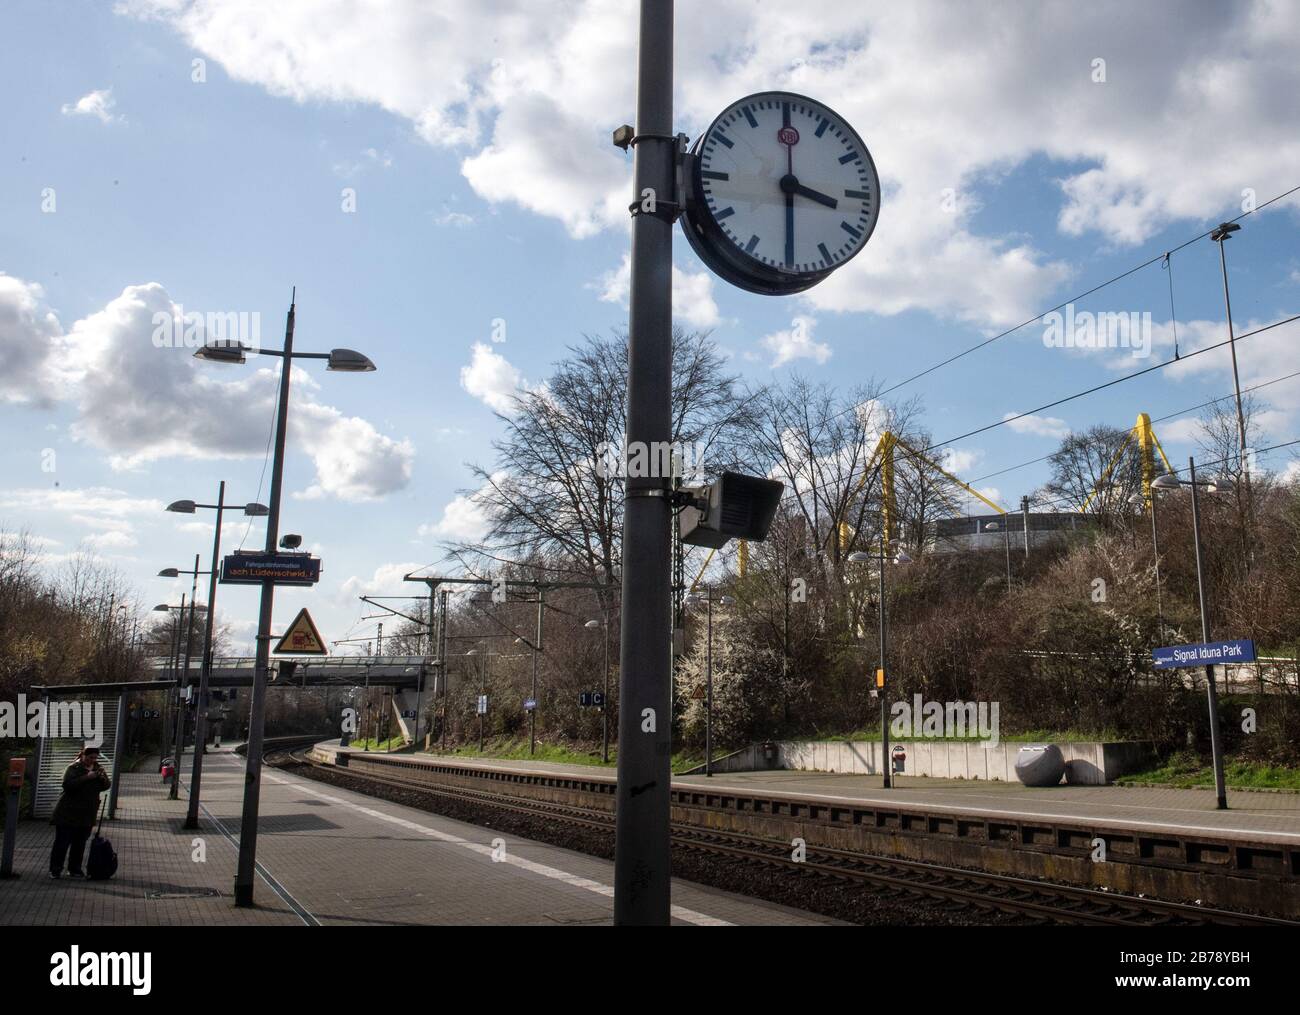 Dortmund, Germany. 14 March 2020, North Rhine-Westphalia, Dortmund: The clock at the almost deserted train station at Borussia Dortmund's stadium, Signal Iduna Park, shows 15:30. Normally, the derby between Dortmund and Schalke would have started at that time. The German Soccer League has temporarily suspended play in the Bundesliga and the 2nd League due to the coronavirus pandemic. The game day planned for this weekend will be postponed, the German Soccer League (DFL) announced on Friday. Photo: Bernd Thissen/dpa - IMPORTANT NOTE: In accordance with the regulations of the DFL Deutsche Fußbal Stock Photo